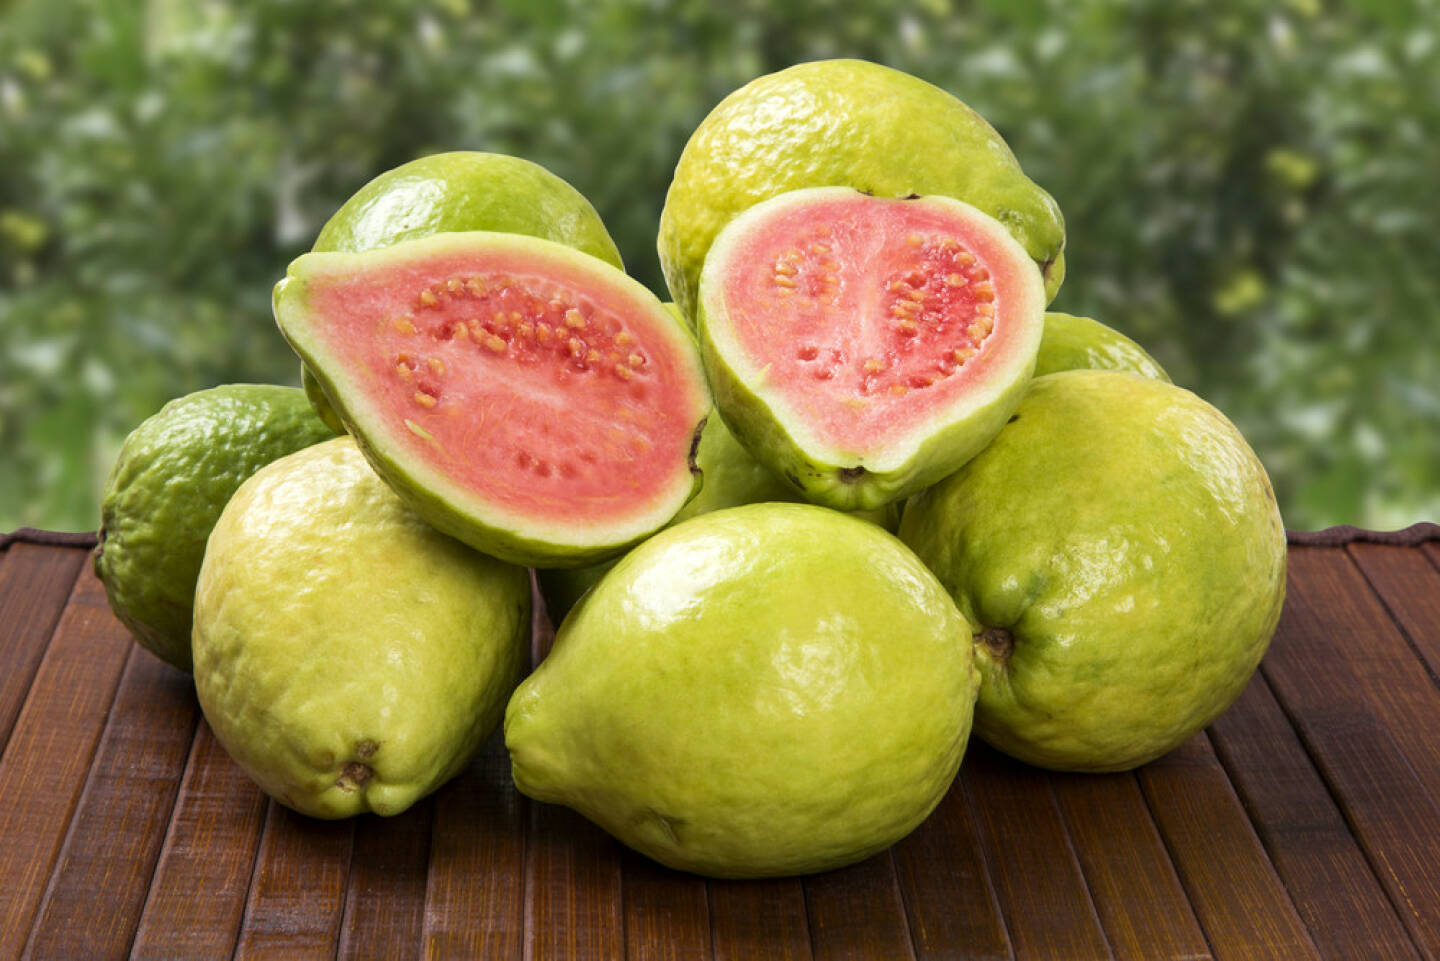 Guave, Superfruit, http://www.shutterstock.com/de/pic-198200321/stock-photo-some-brazilian-guavas-over-a-wooden-surface.html